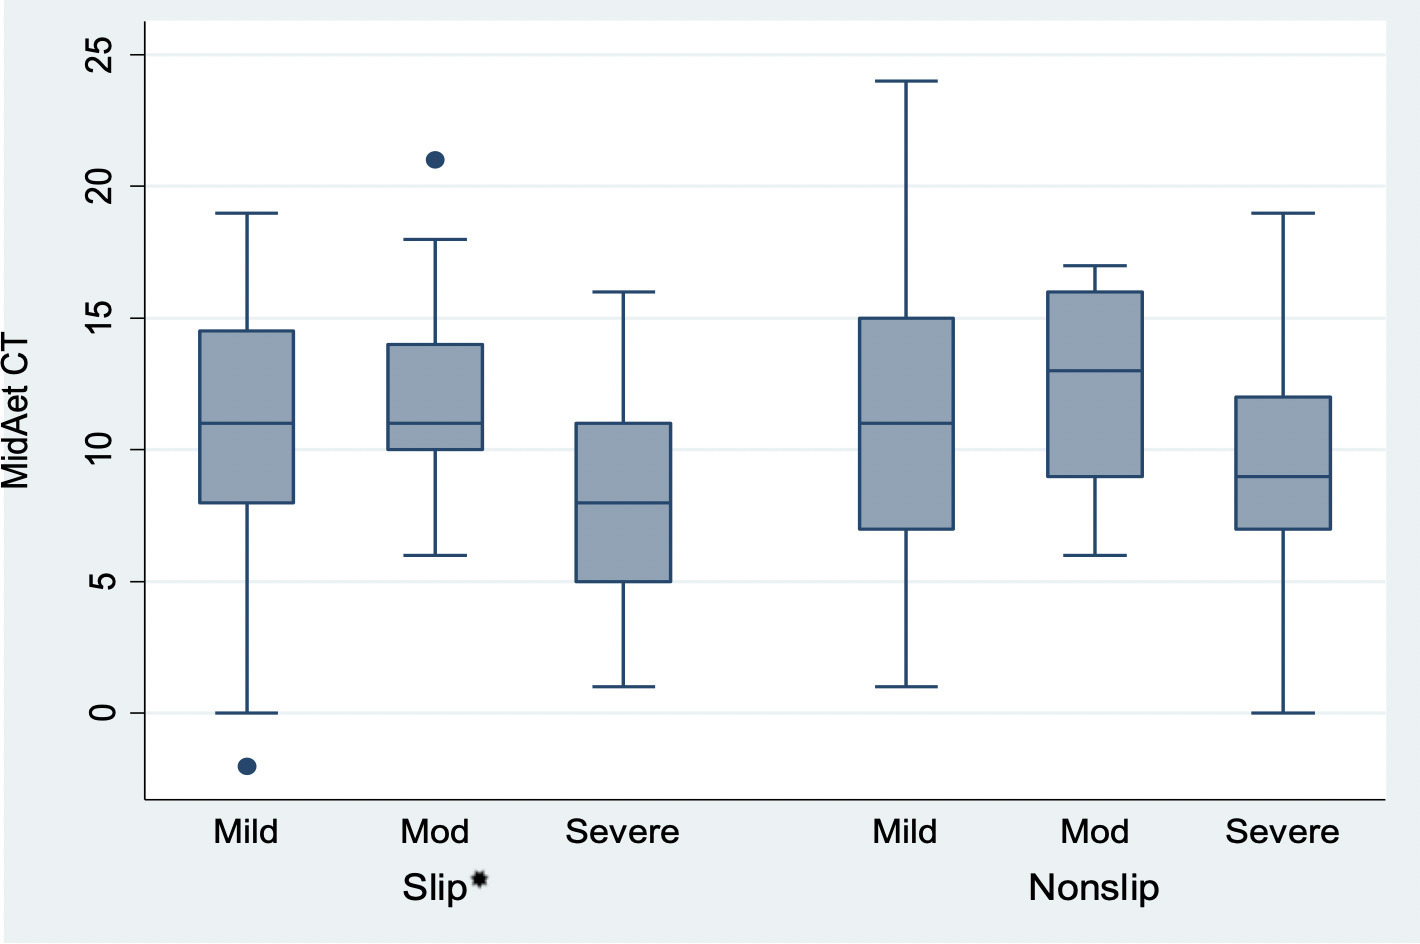 Fig. 4 
          Measurements of mid-acetabular version for slip side (n = 99) and contralateral (non-slip) side (n = 83) by presenting severity of slip. No statistically significant relationship was noted between slip and non-slip side (p = 0.284). *One-way analysis of variance demonstrated increasing retroversion (p = 0.004) on slip side with increasing severity.
        